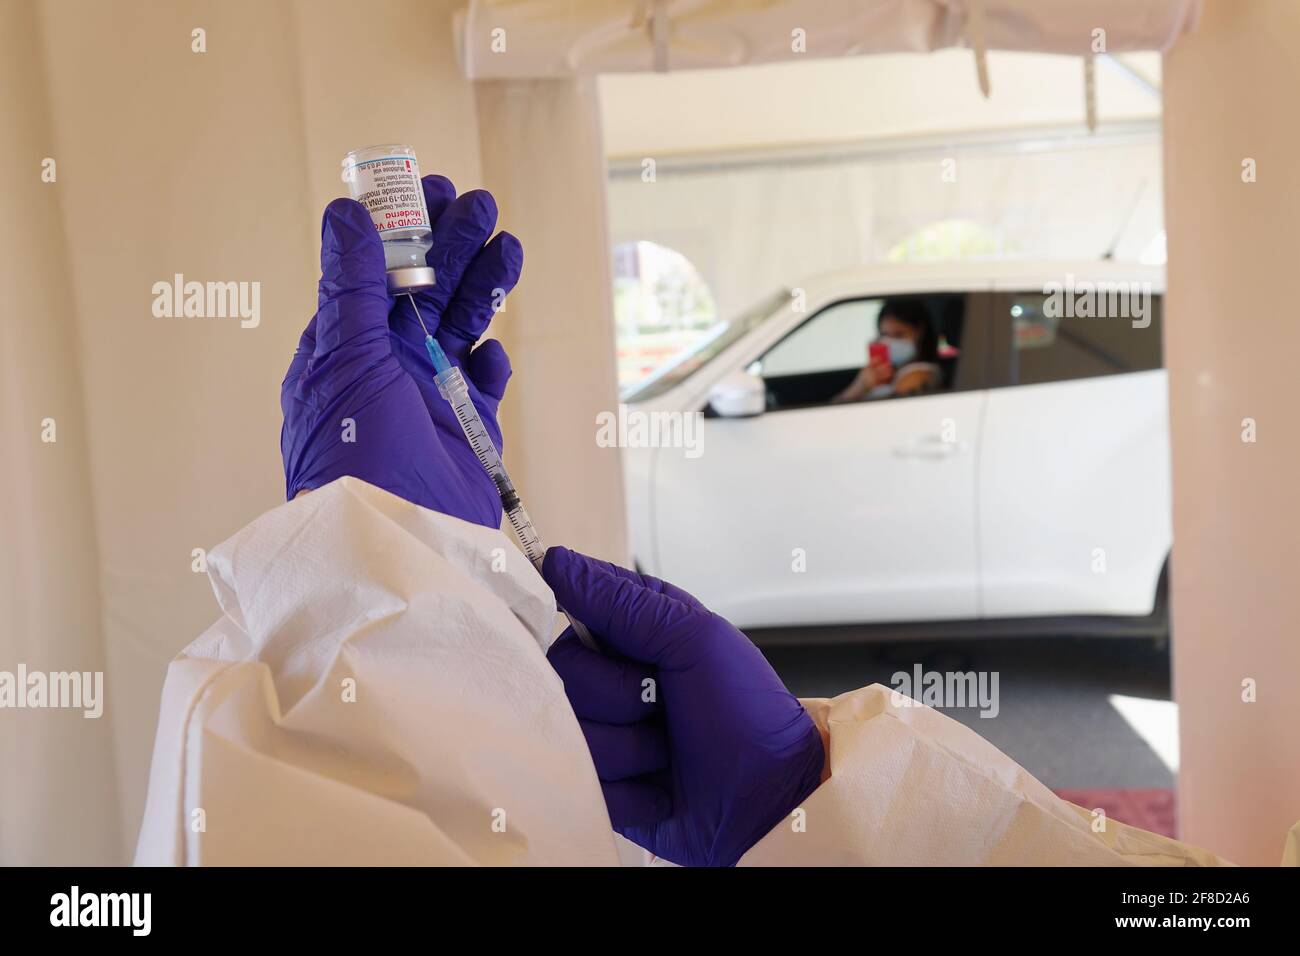 Mass vaccination campaign, inoculation of vaccine in the car at a drive-through vaccine site. Turin, Italy - April 2021 Stock Photo